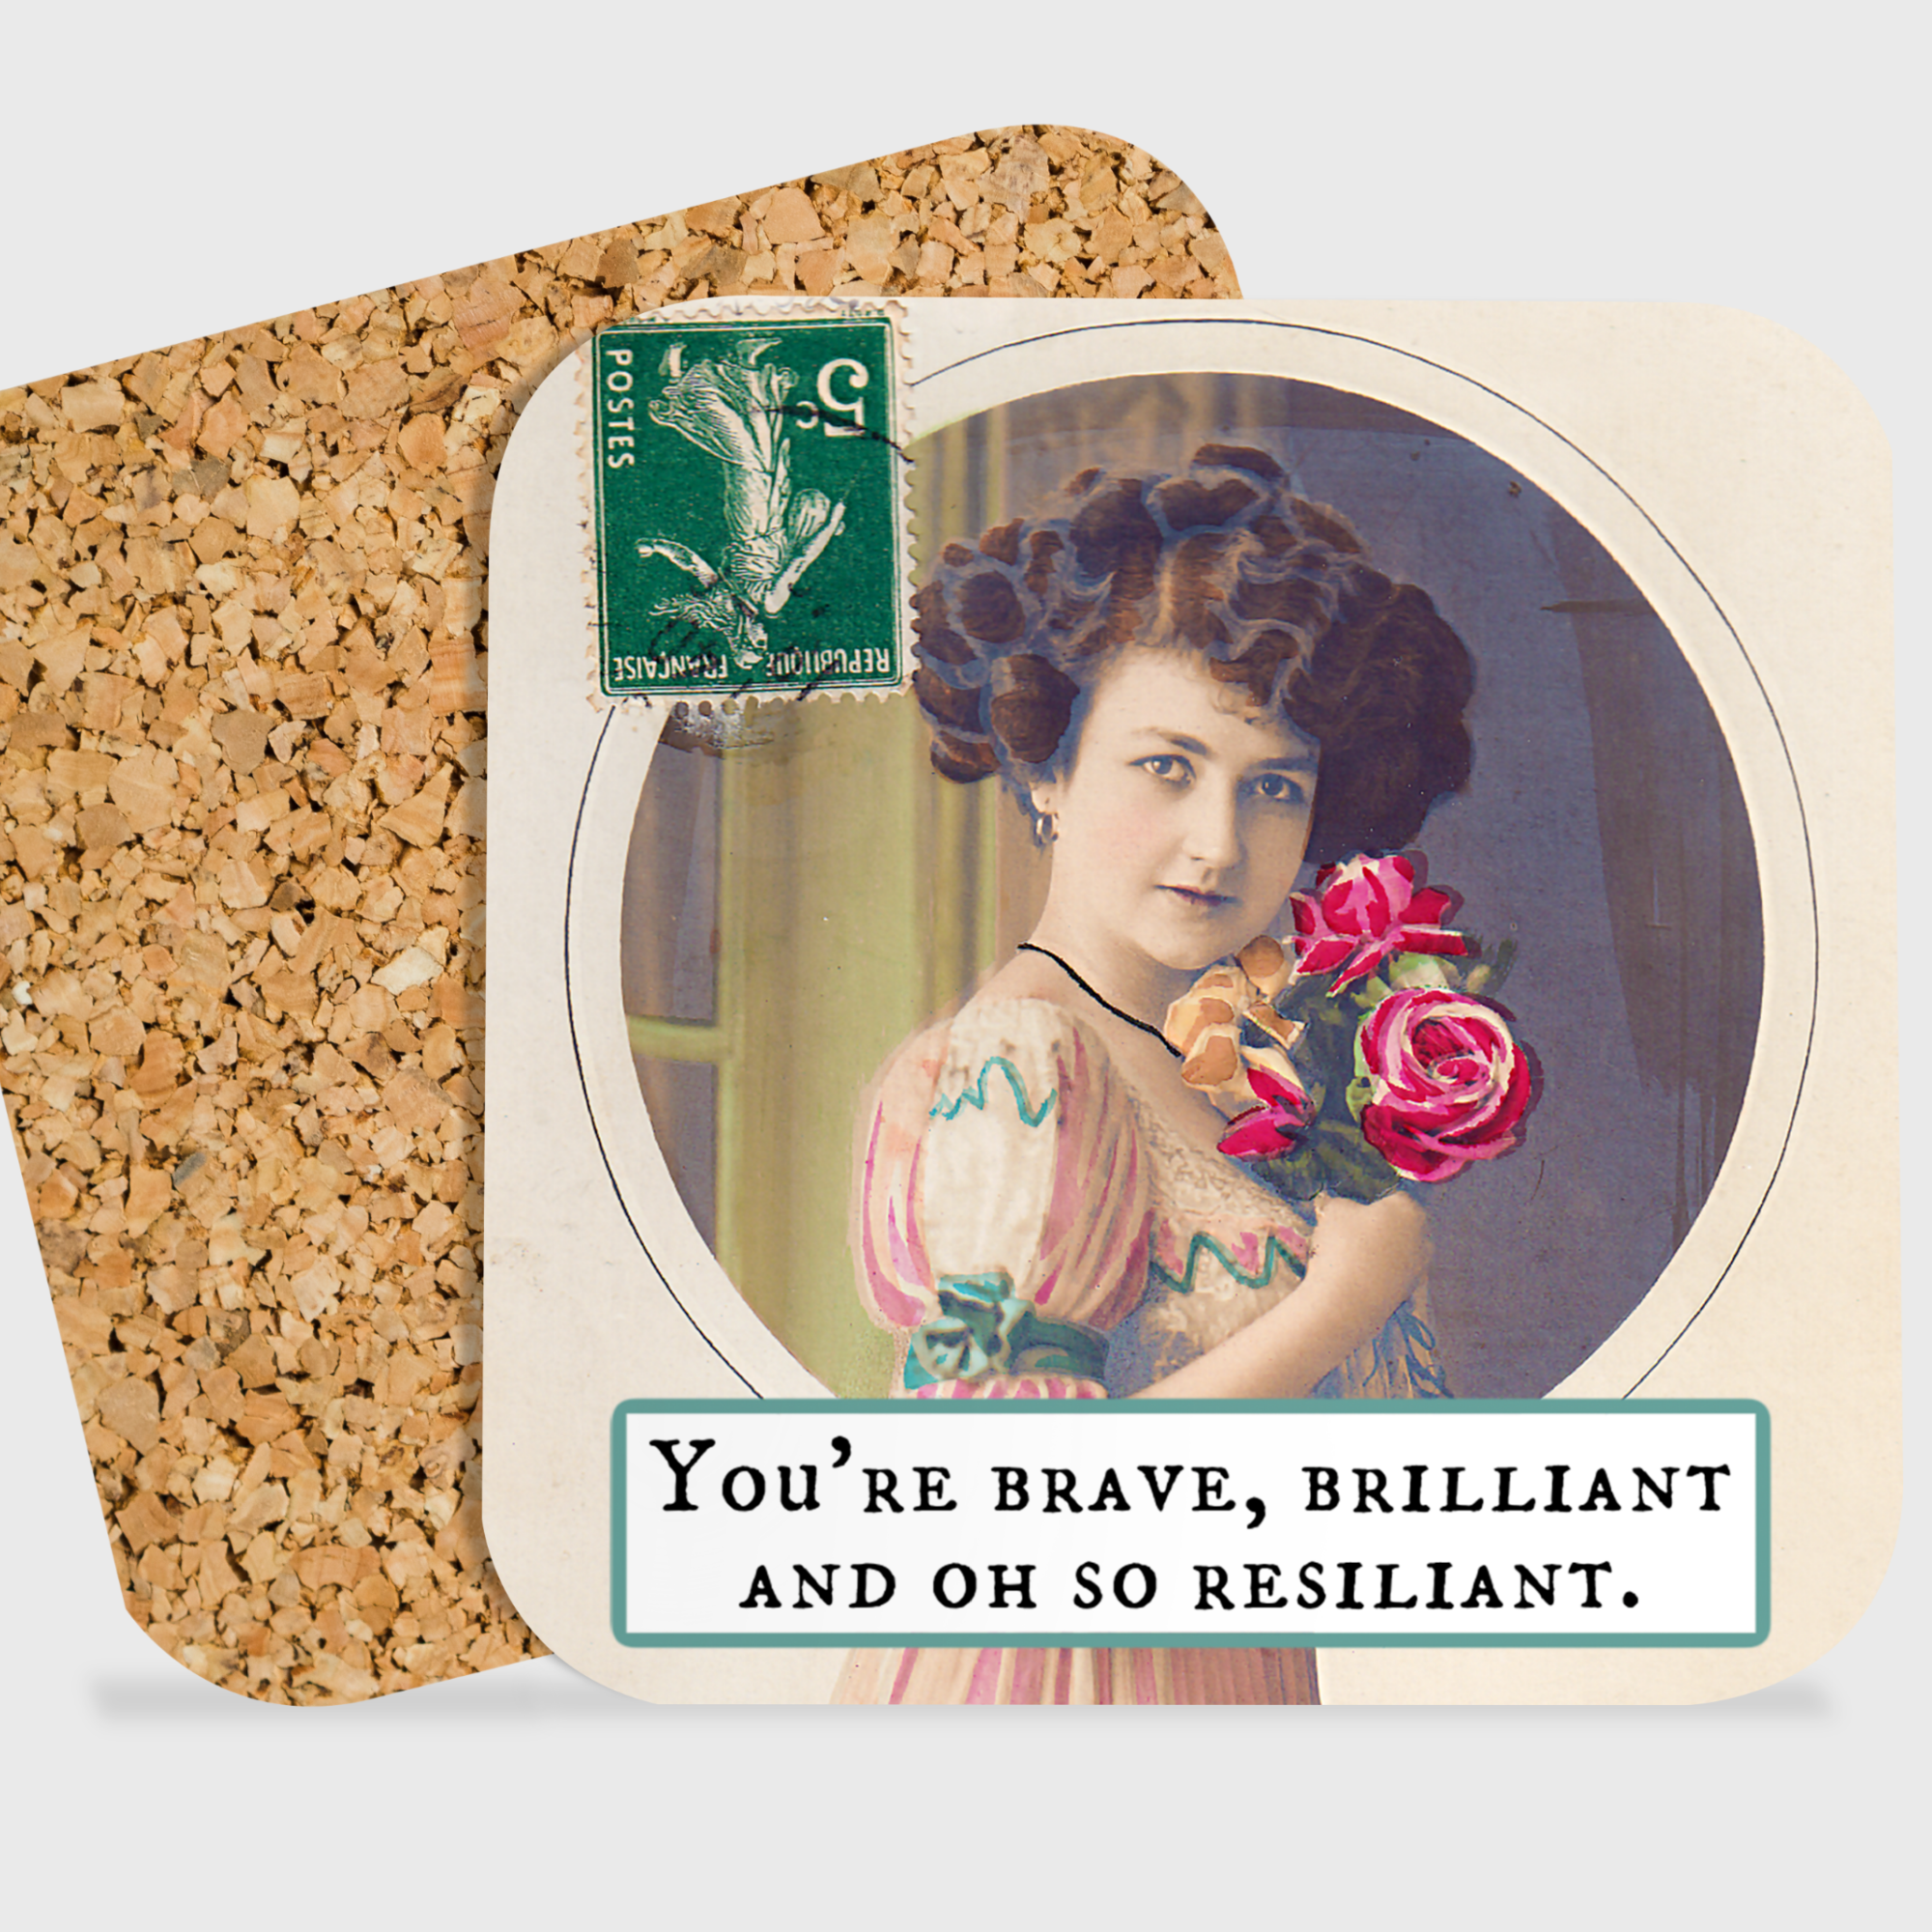 COASTER. You're Brave, Brilliant and Oh So Resilient. - 0